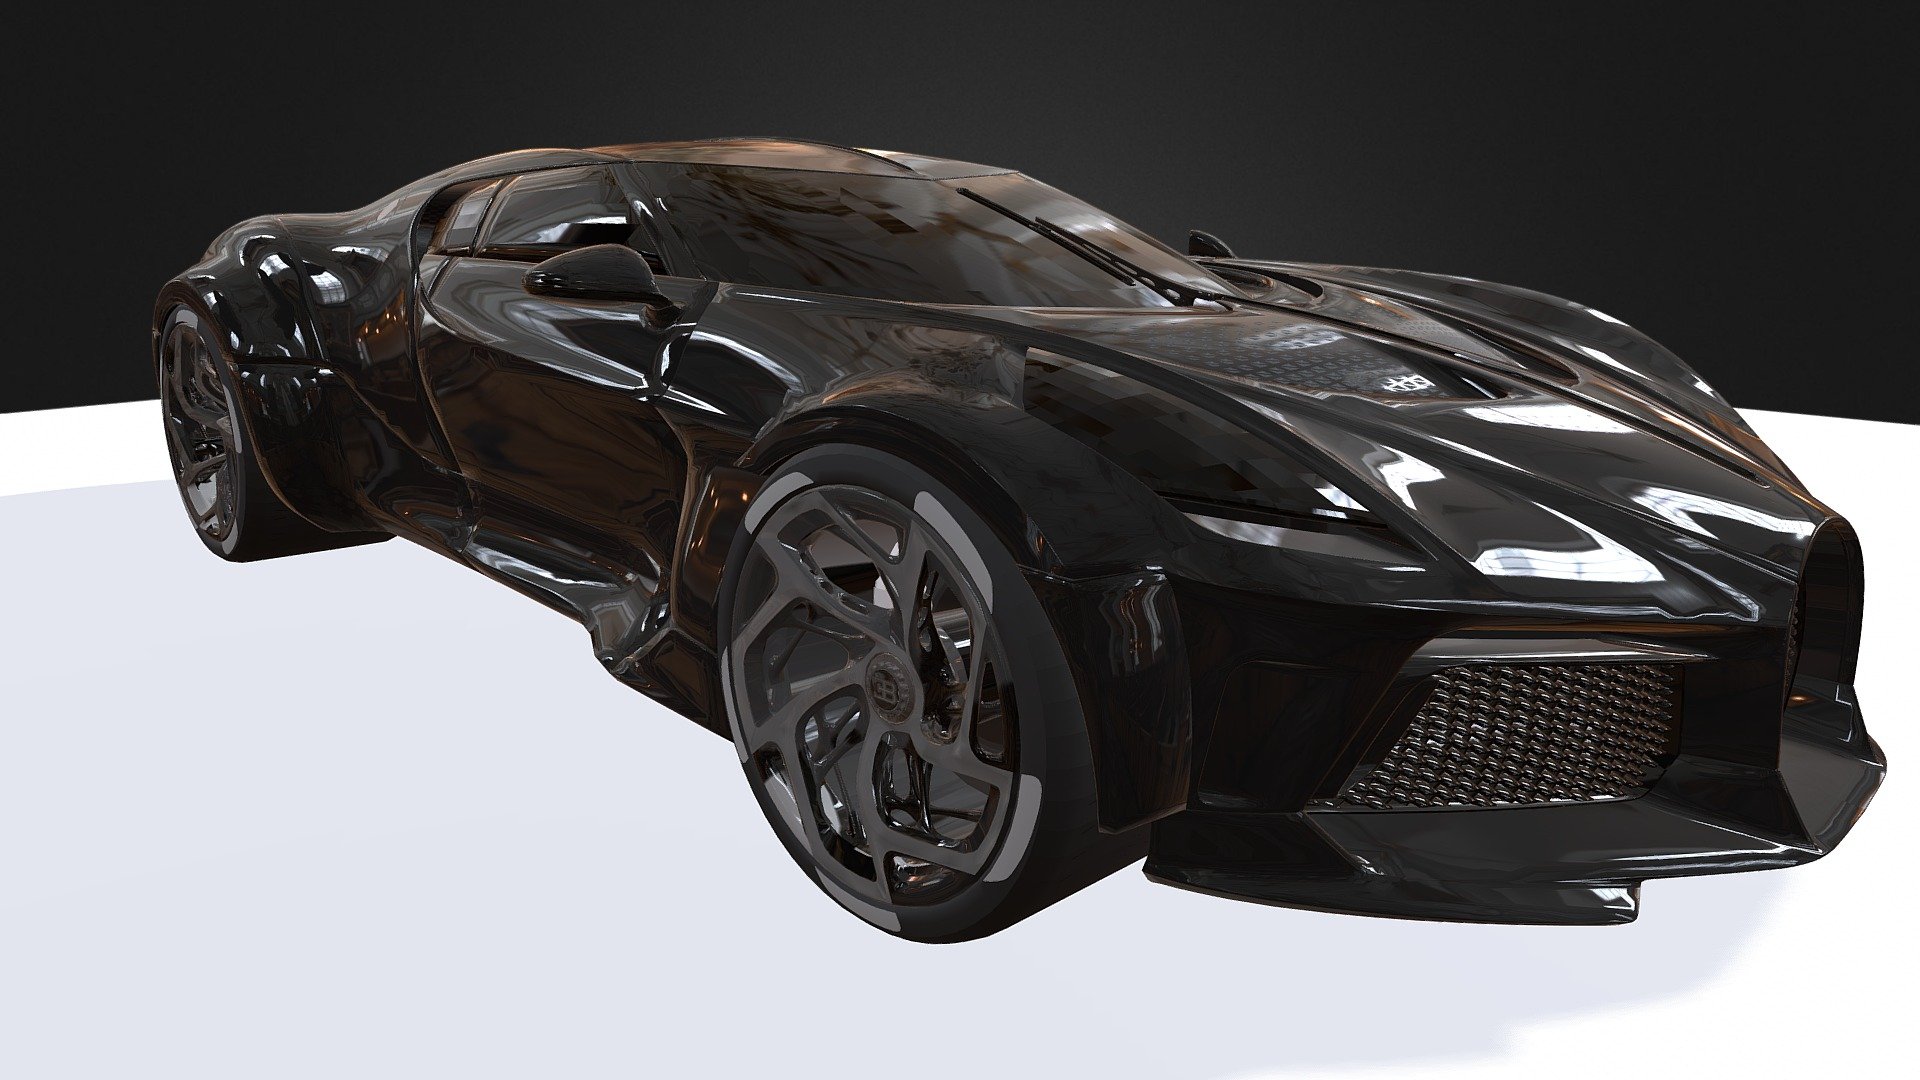 Bugatti la voiture noir it is a tribute to Bugatti's own history
a manifesto of bugatti aesthetic and a piece of automotive haute couture
this is a la voiture noir 
made in 3ds max and blender - Lavoiturenoir - 3D model by sanjeetbiswal (@sanjeetbiswal2011) 3d model